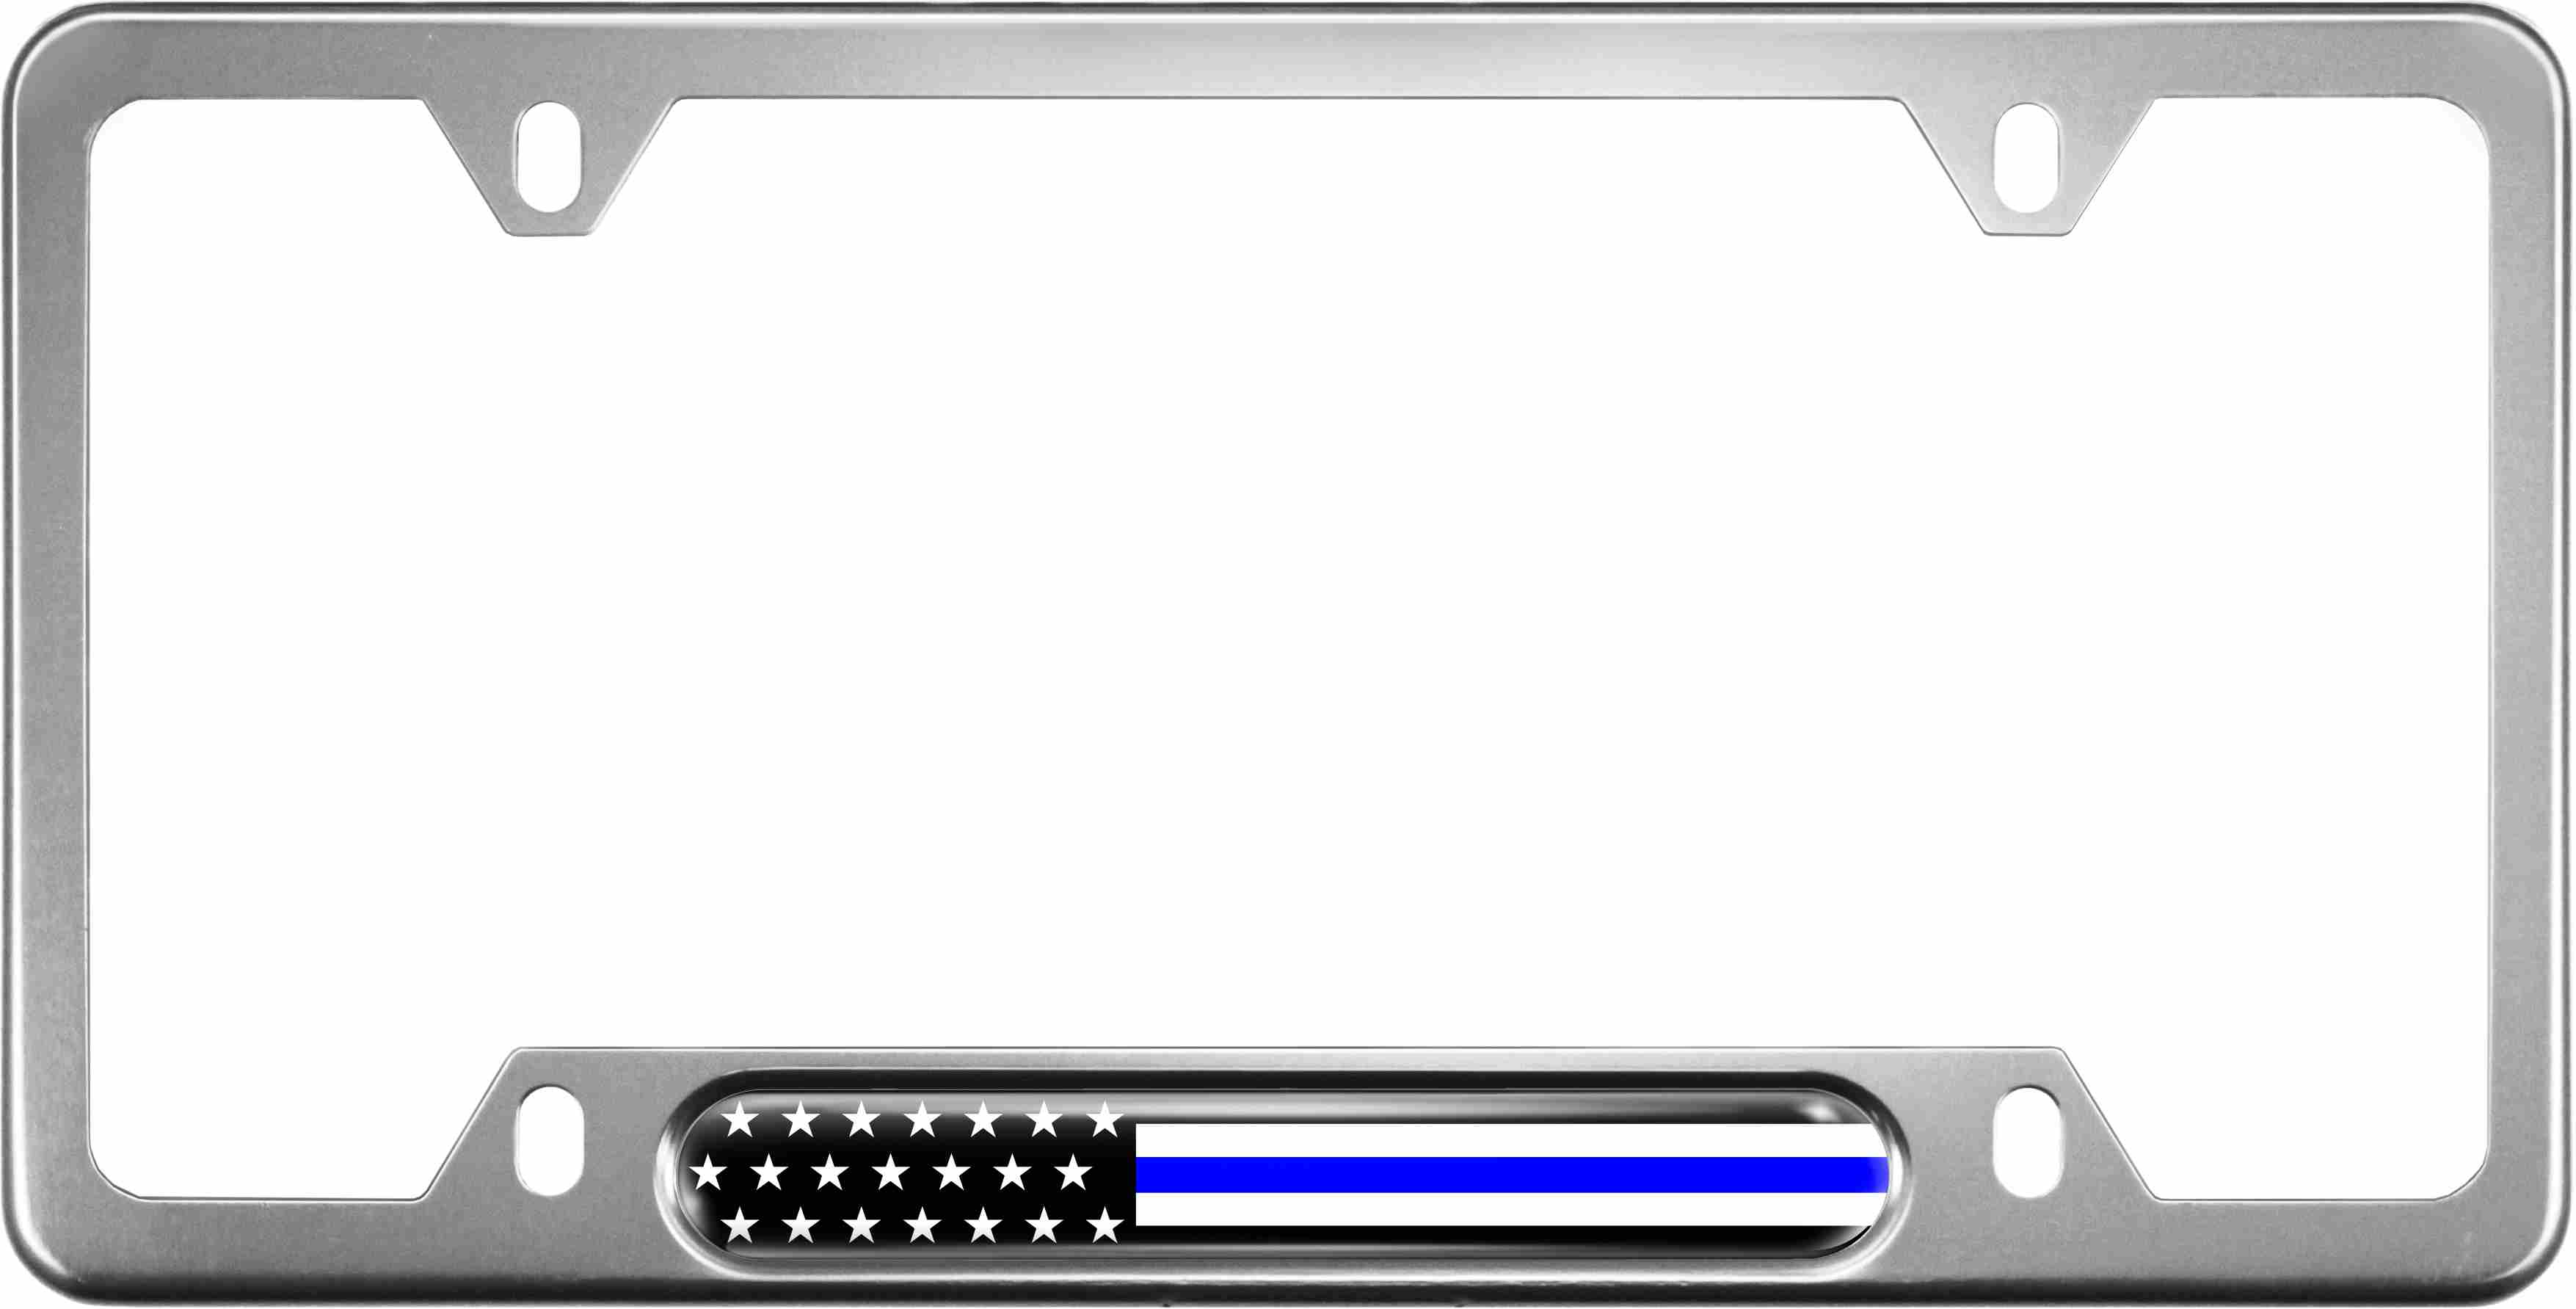 Duty Honor Courage Thin Blue Line with U.S. Flag - Car Metal License Plate Frame